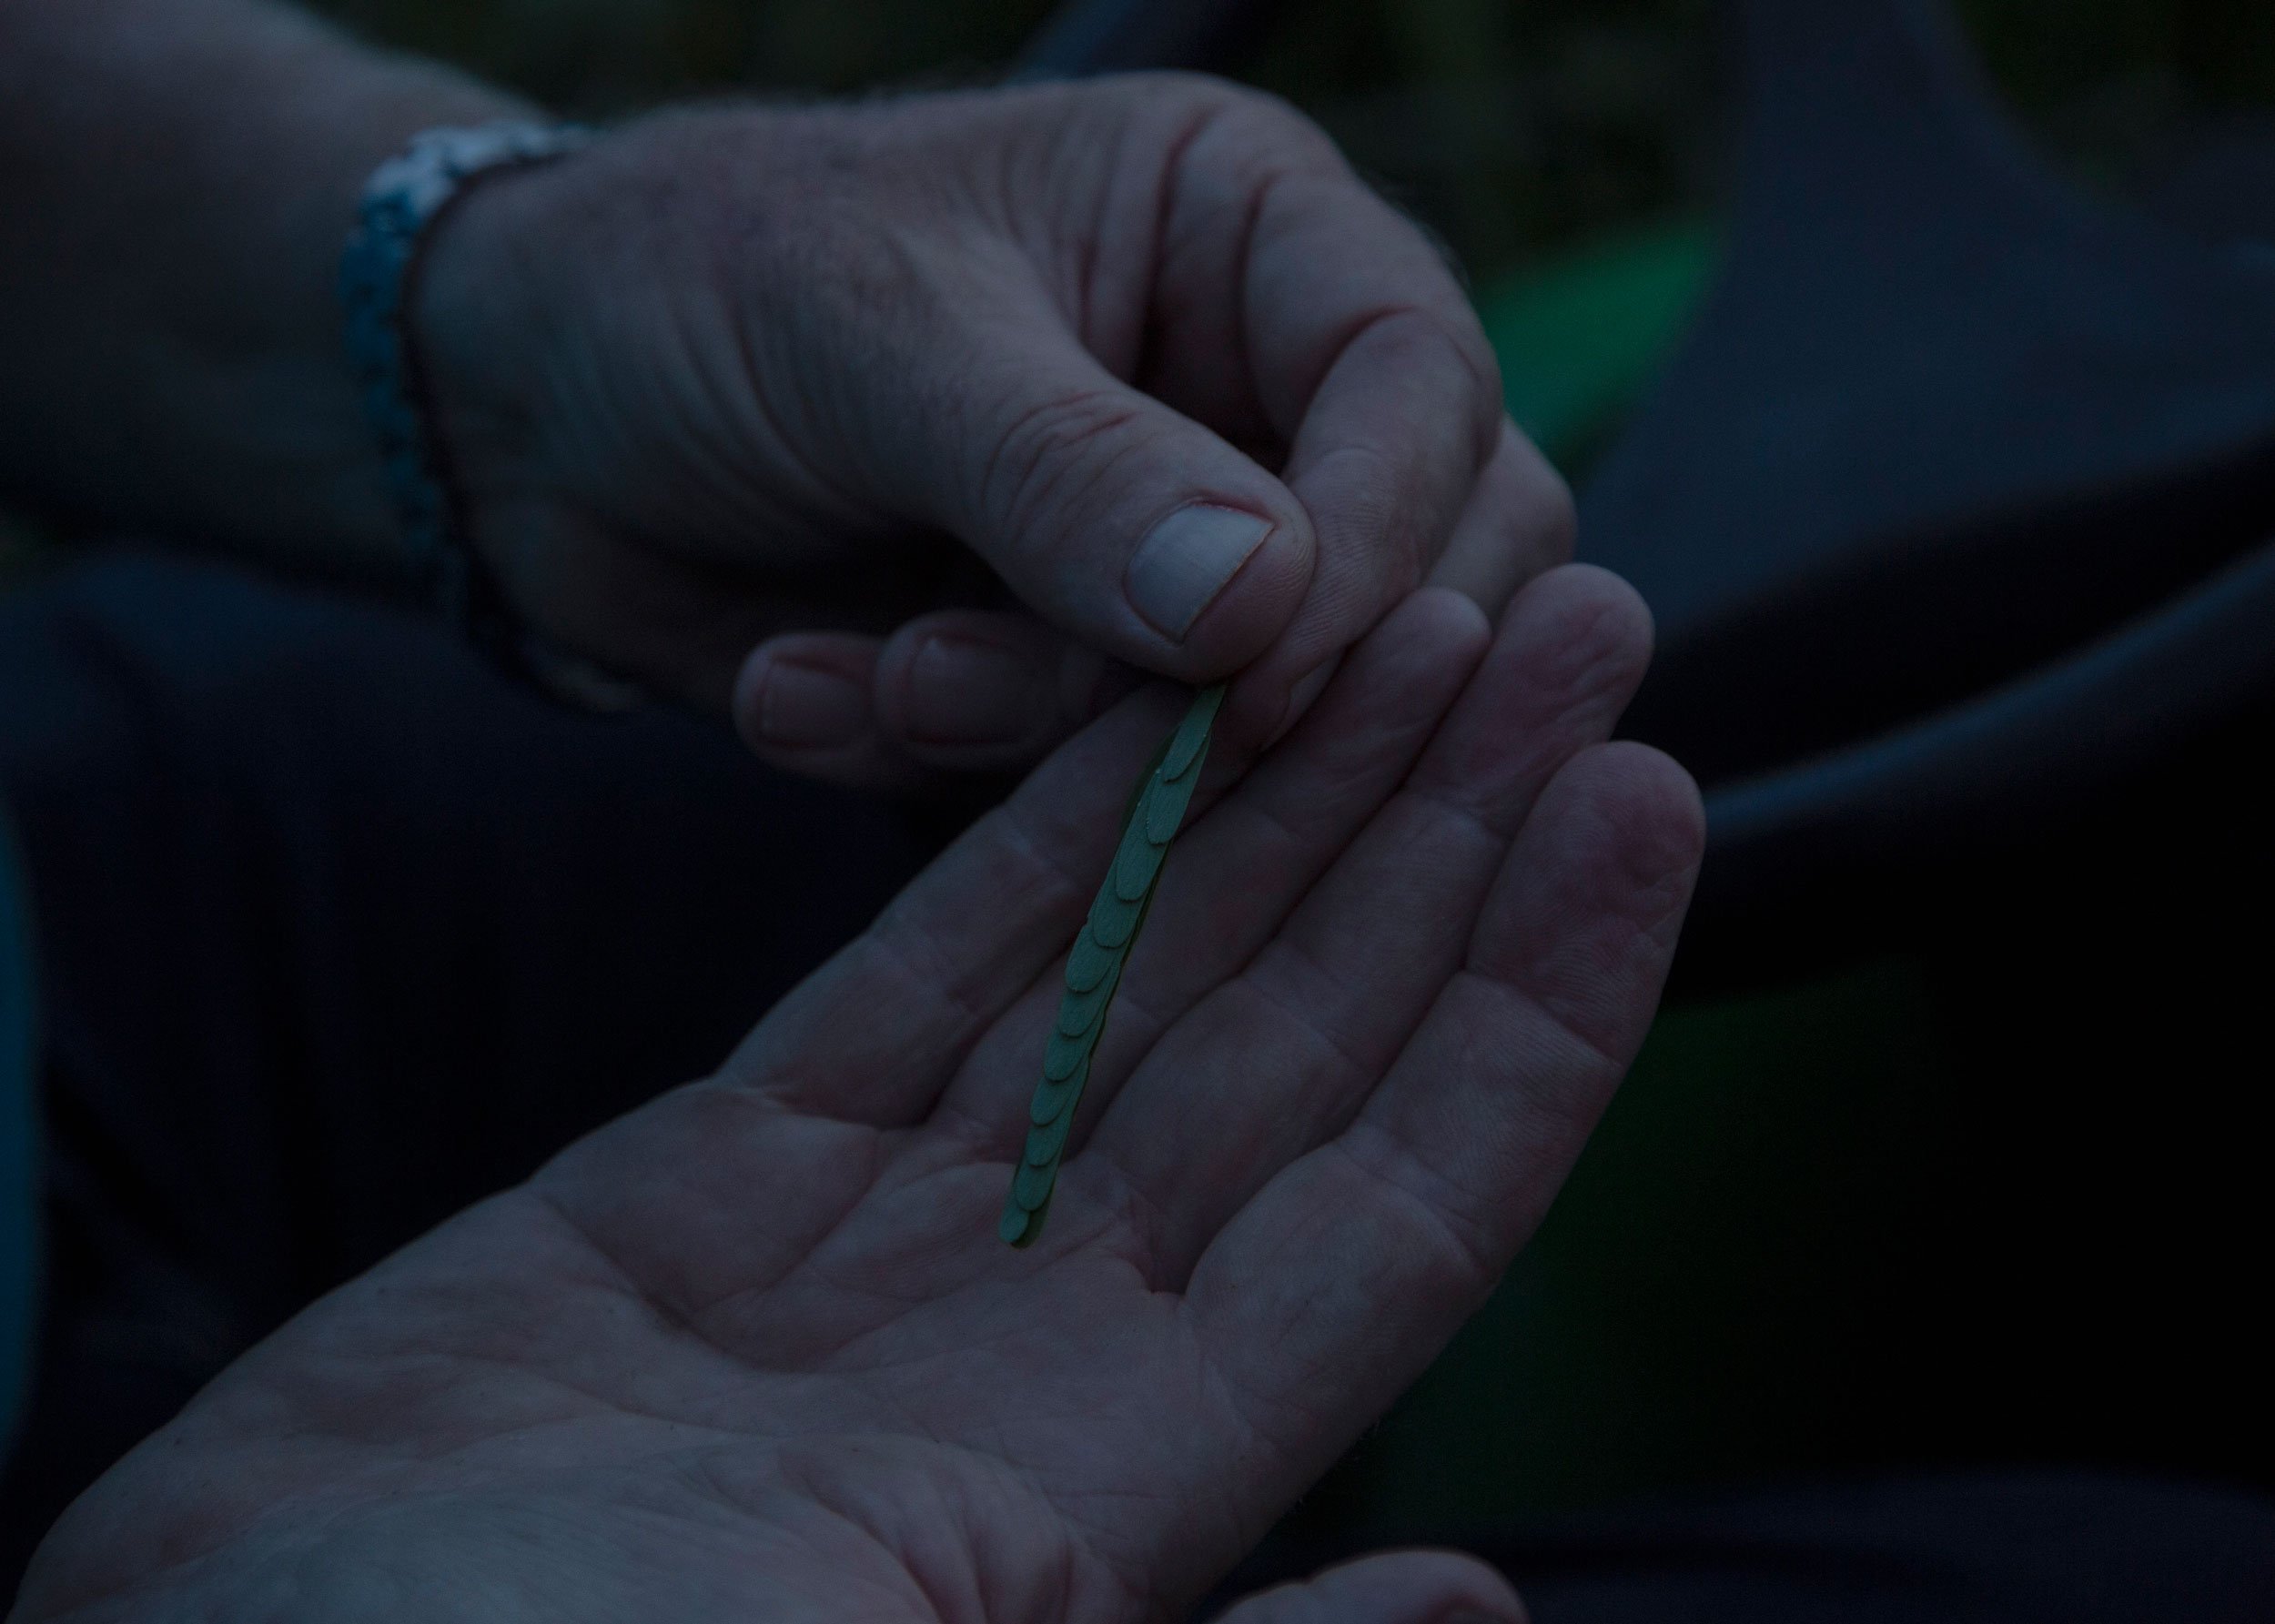 Jon shows how a partridge pea leaf closes at night